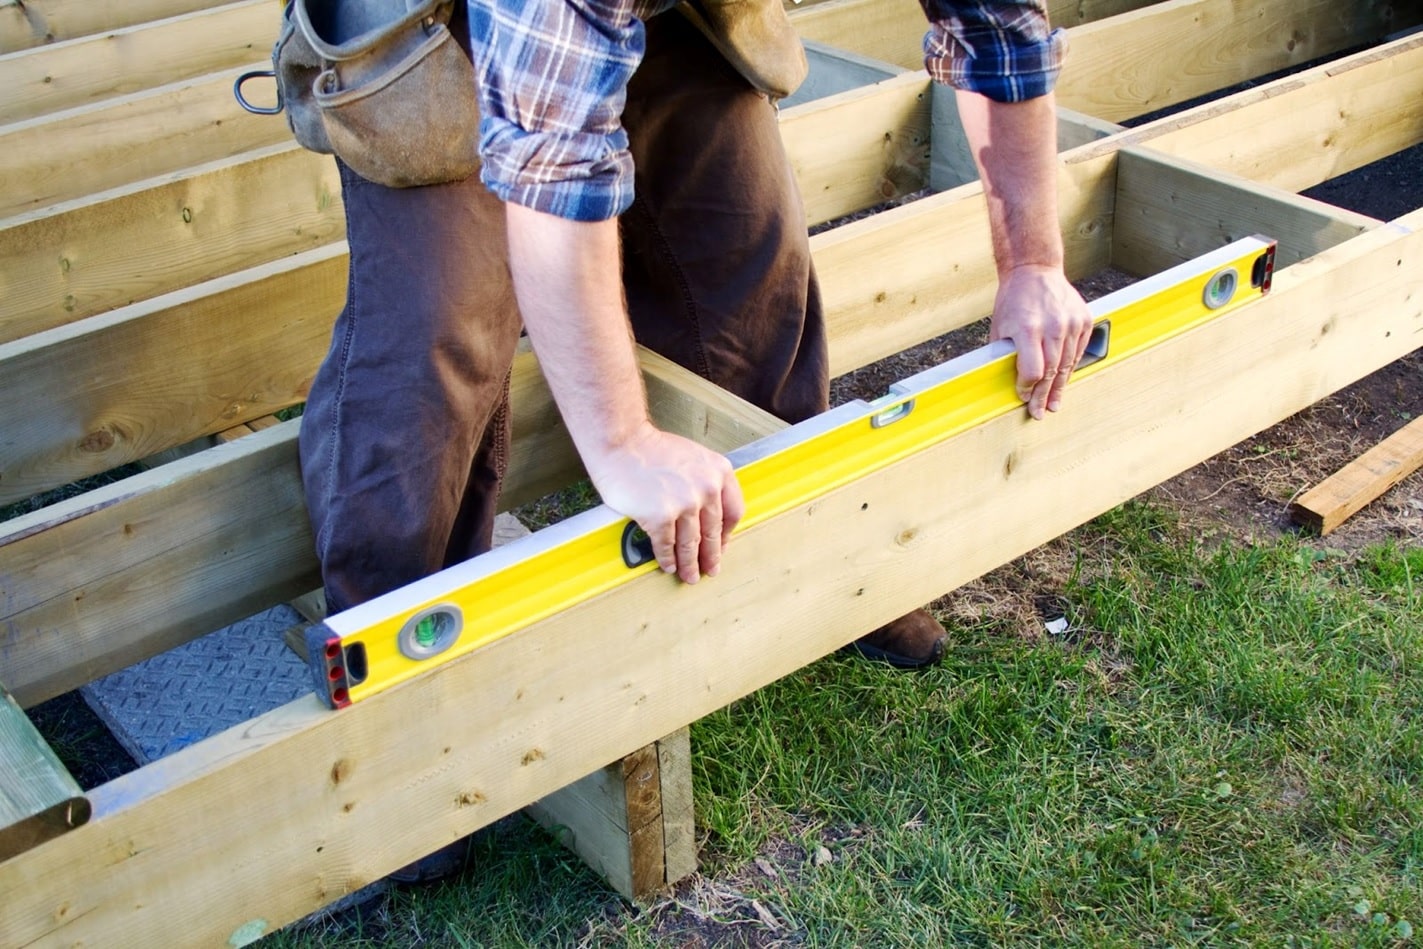 Consumer’s Guide to Hiring a Fencing and Decking Contractor